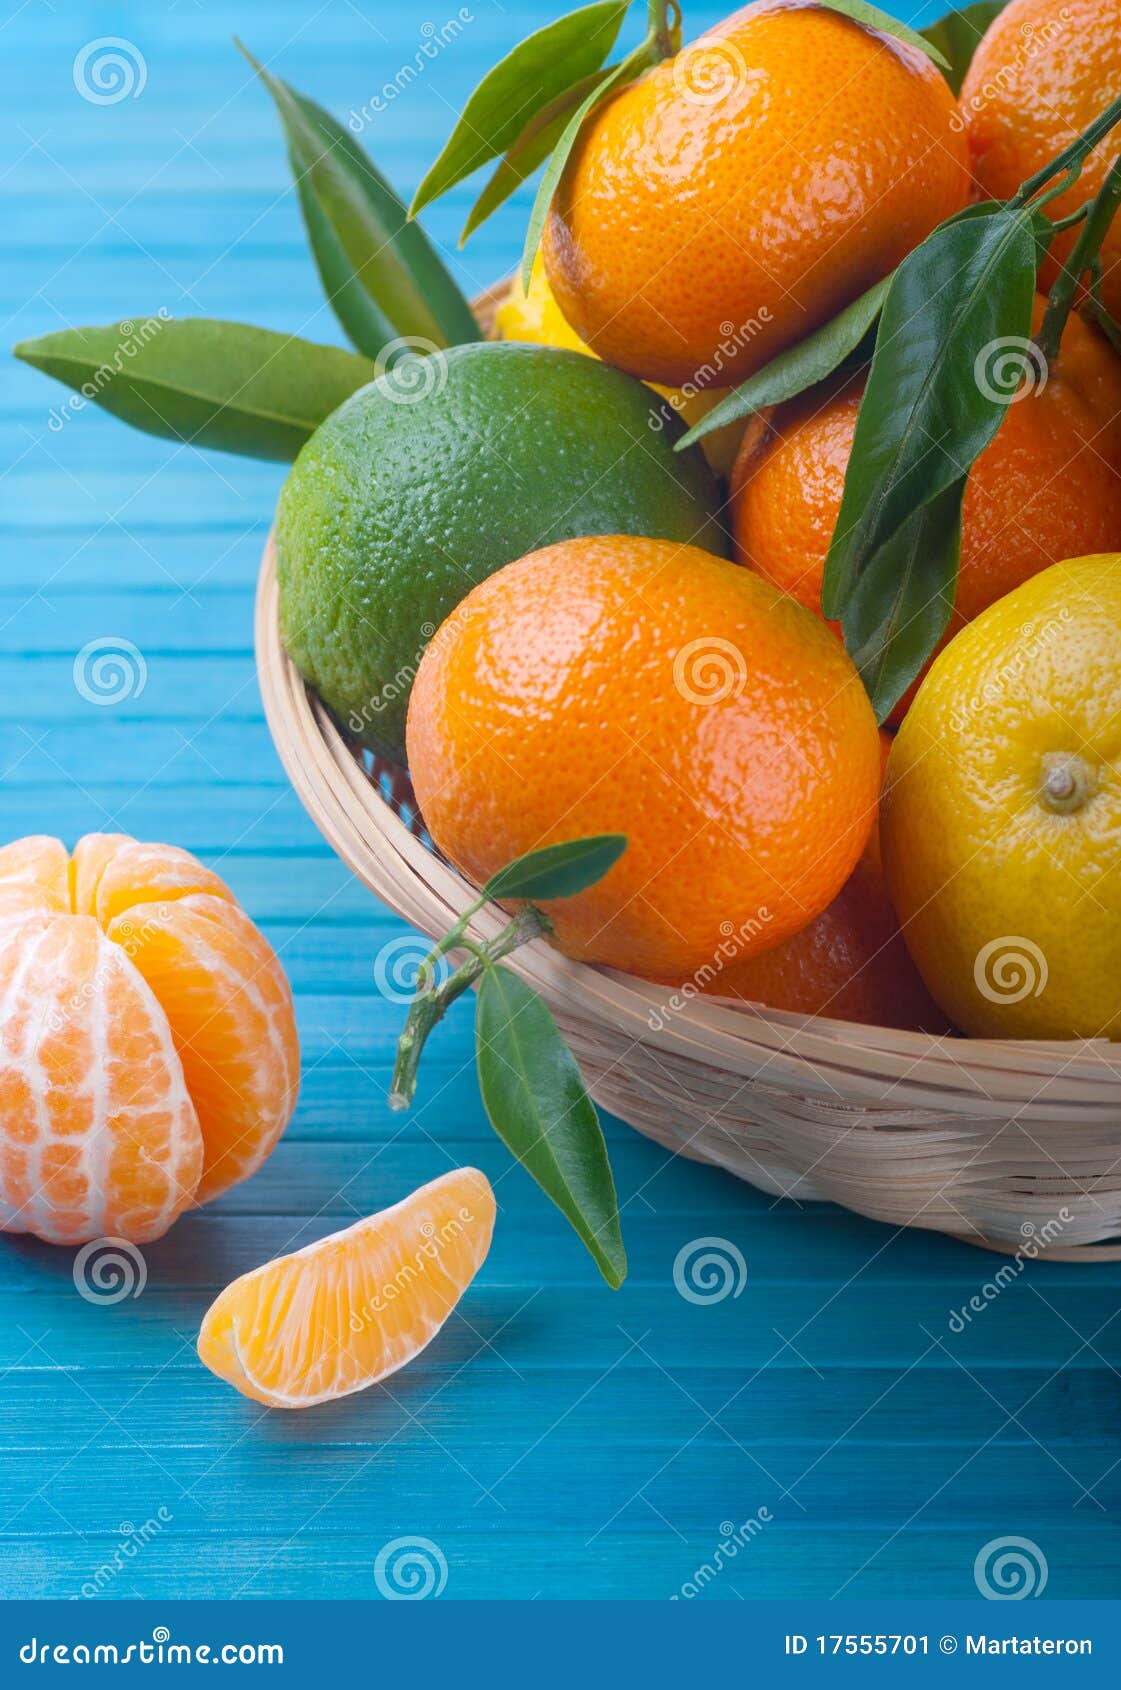 tangerines and lime